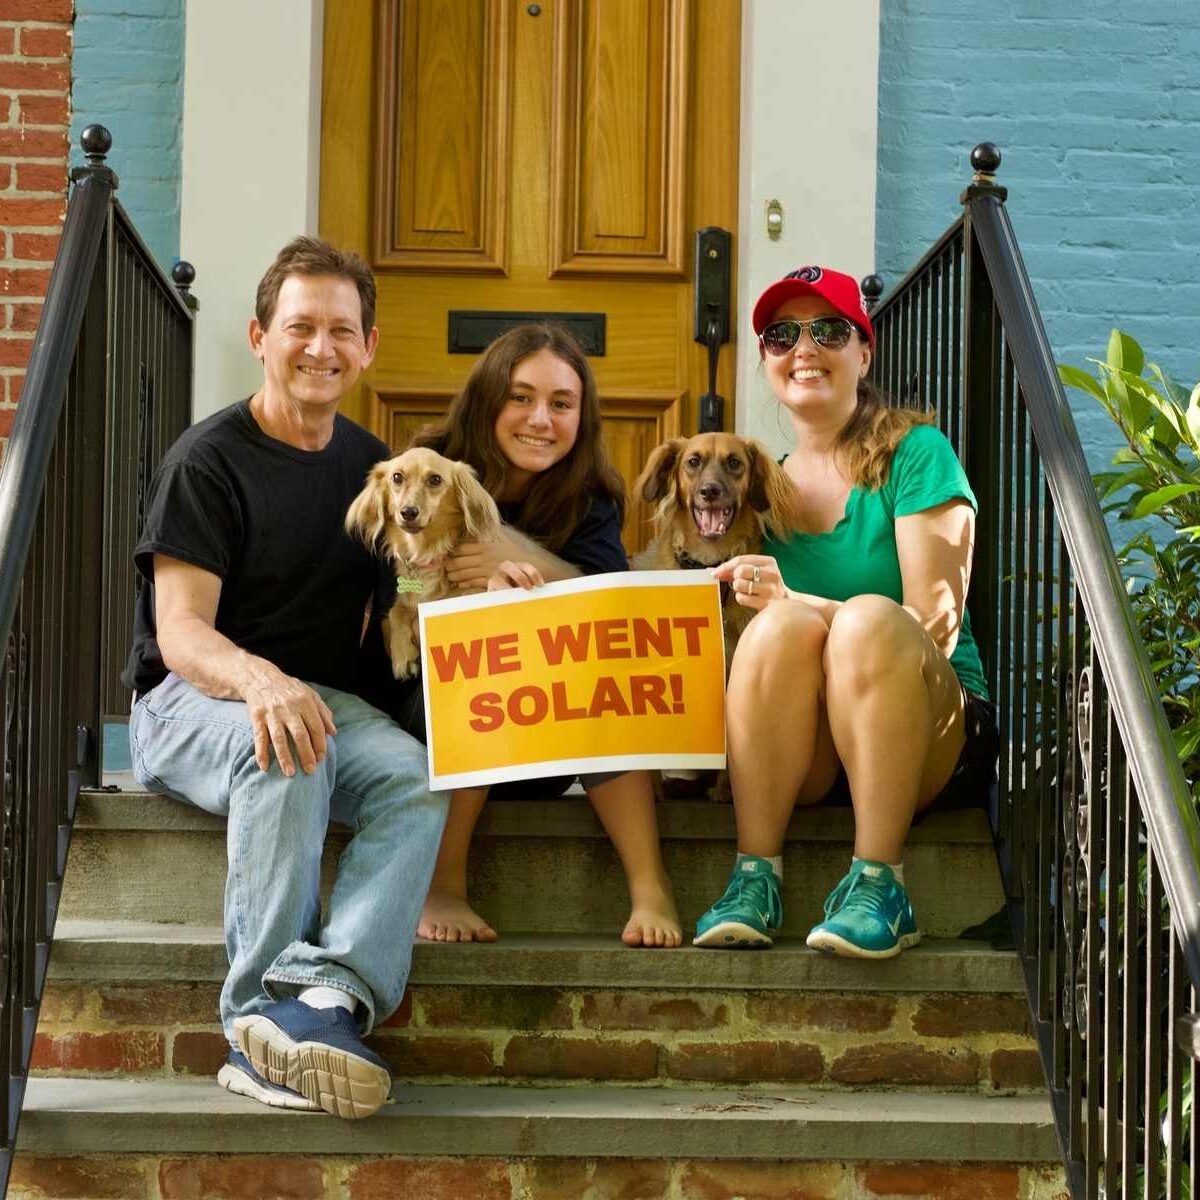 Family of mother, father, and daughter, and two dogs, holding a "We went solar" sign while sitting on their front stoop.